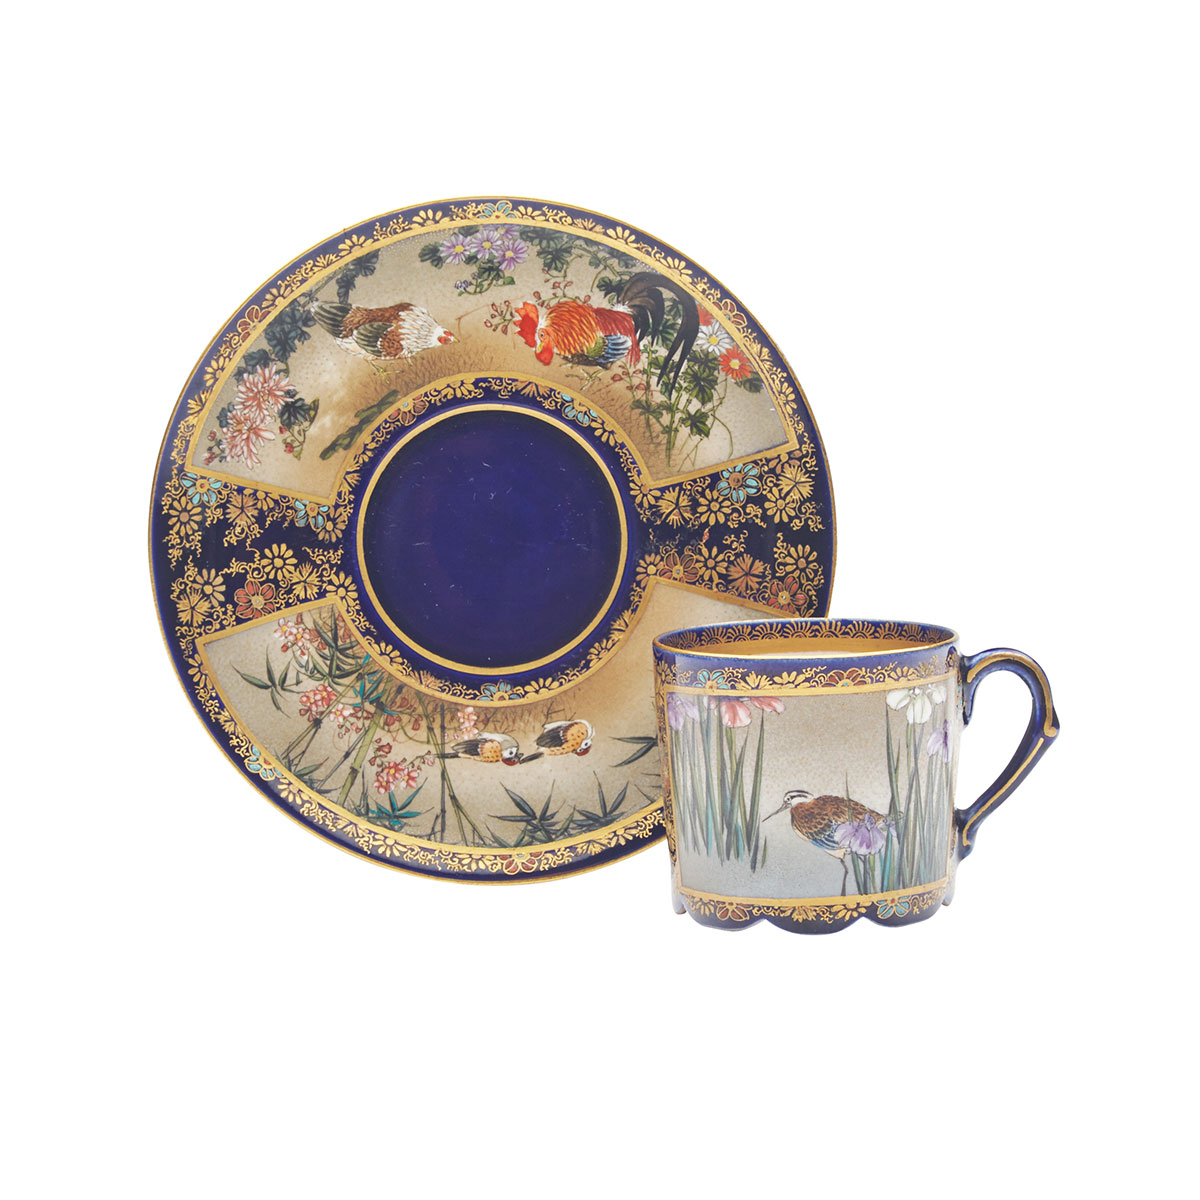 Finely Painted Satsuma Tea Cup and Saucer, Signed Kinkozan, Meiji Period, Late 19th Century